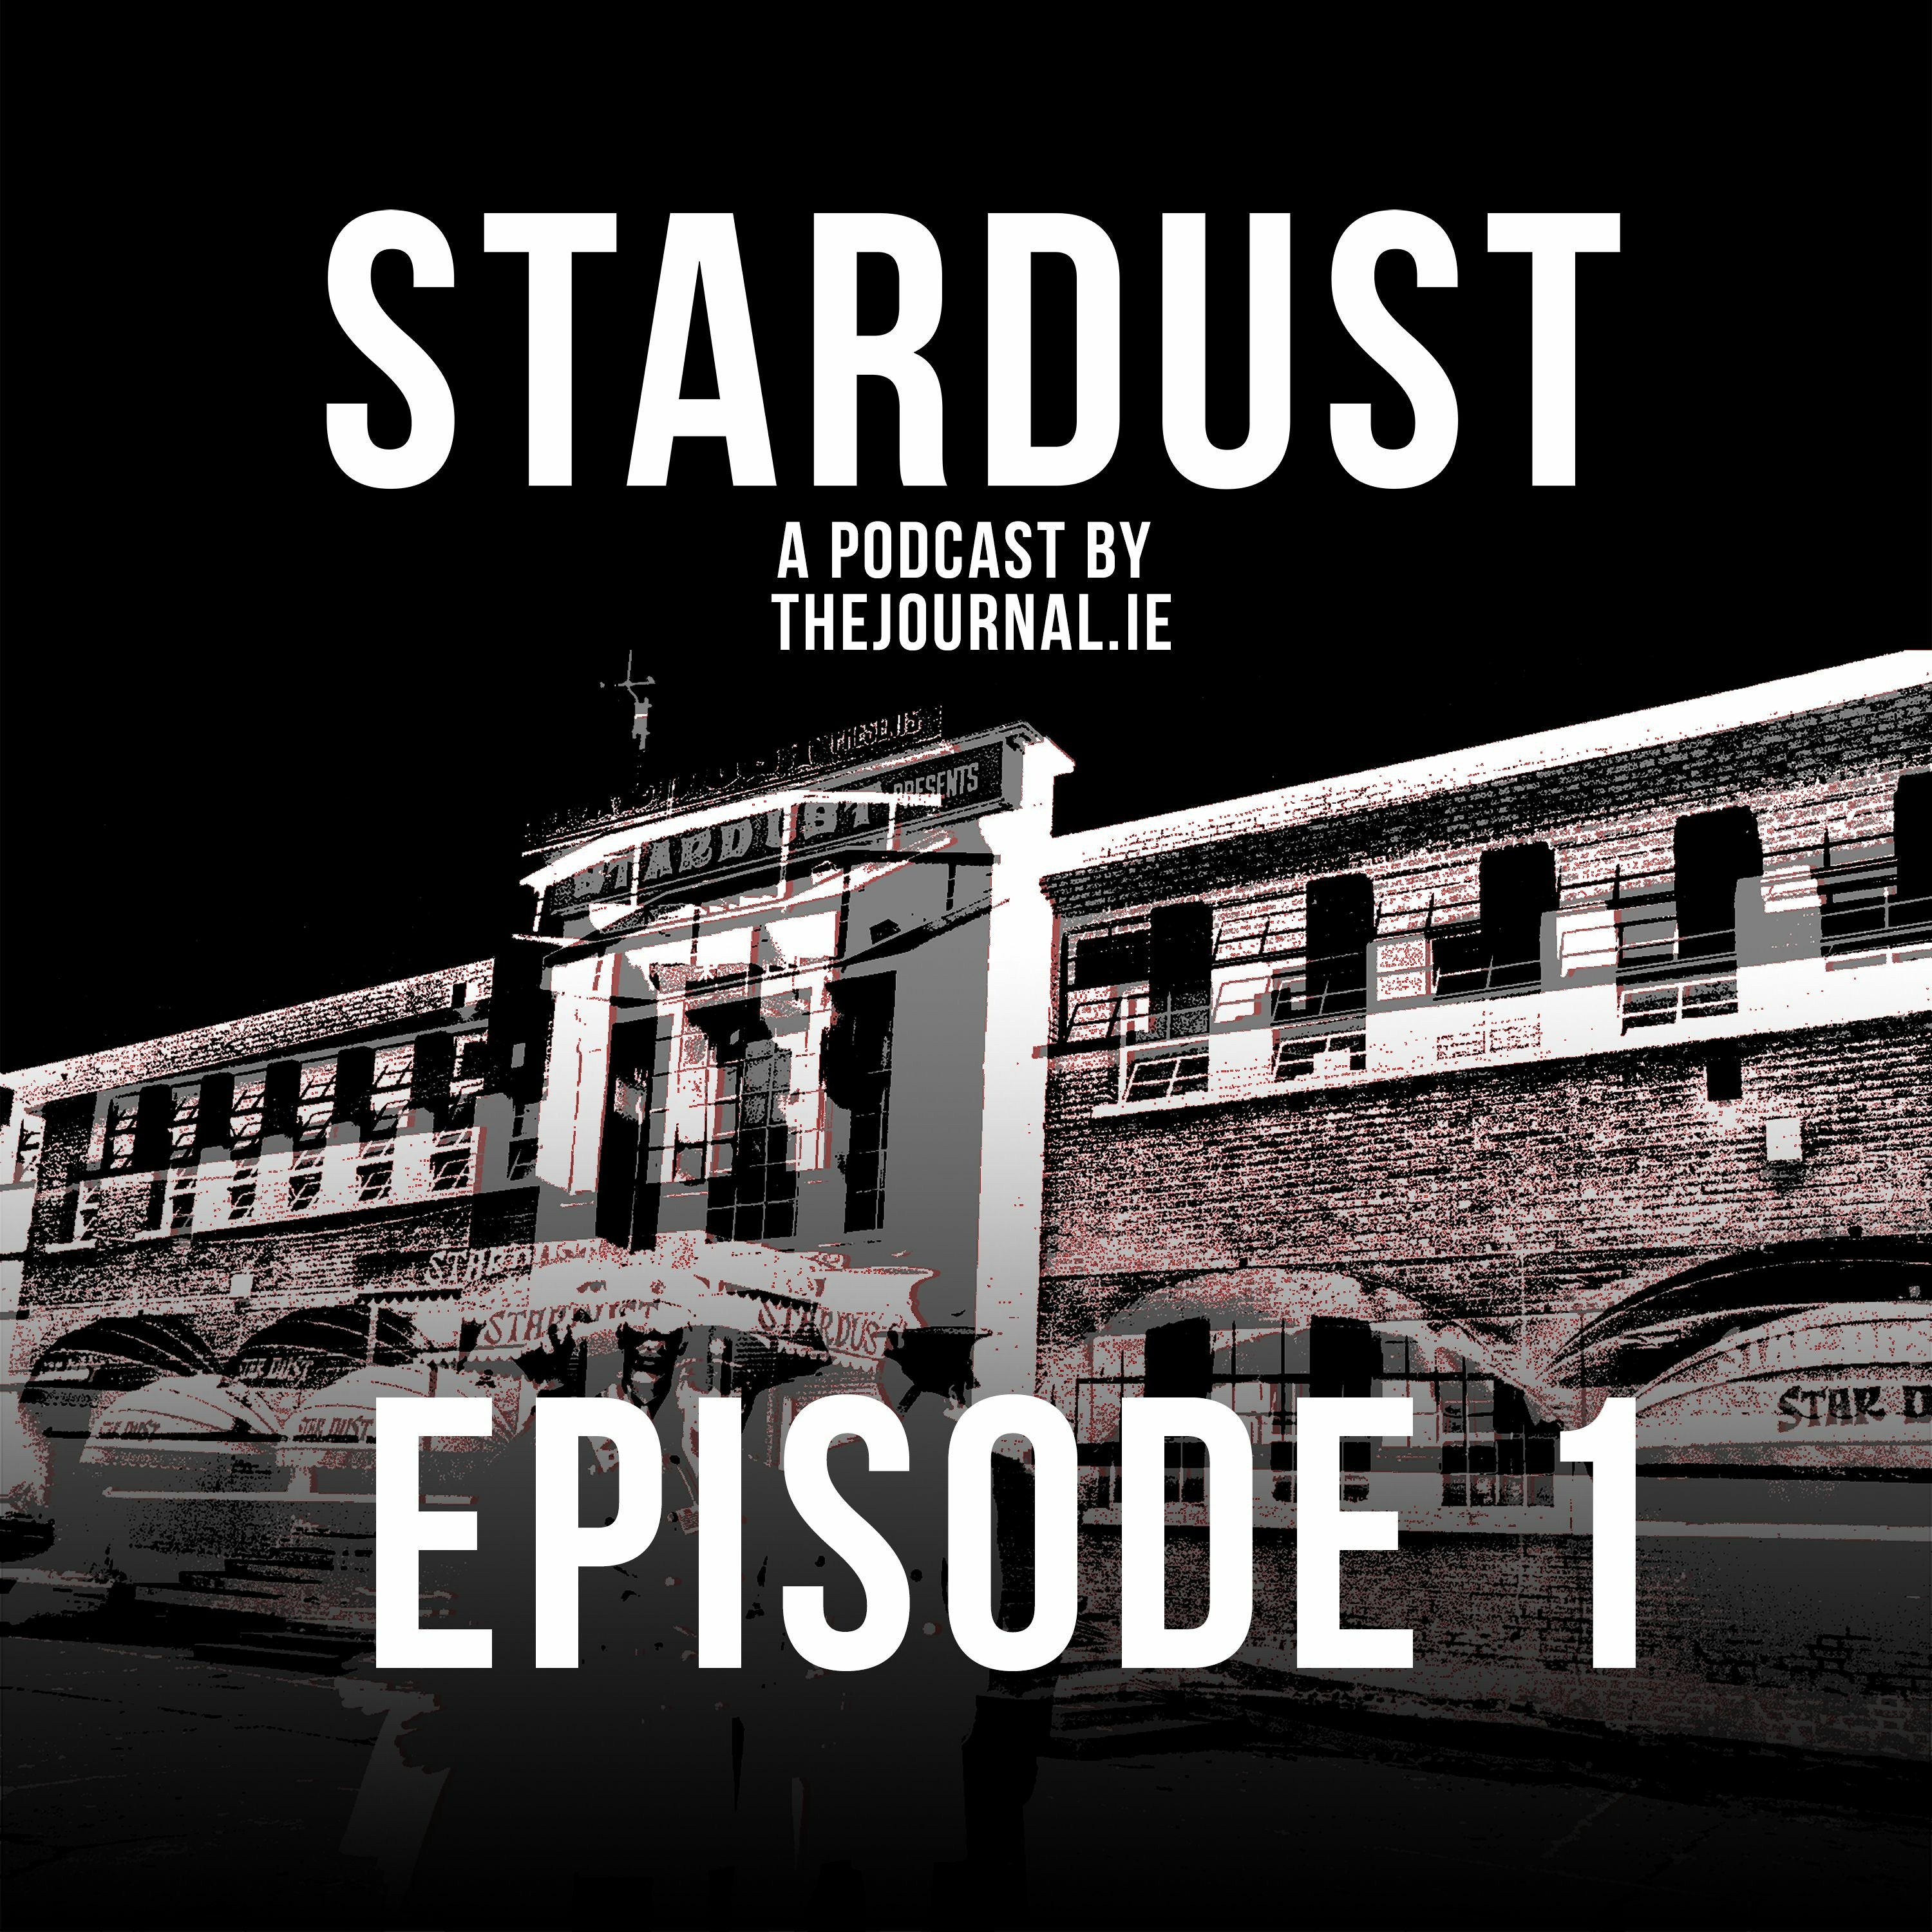 Episode 1: The biggest show on the northside